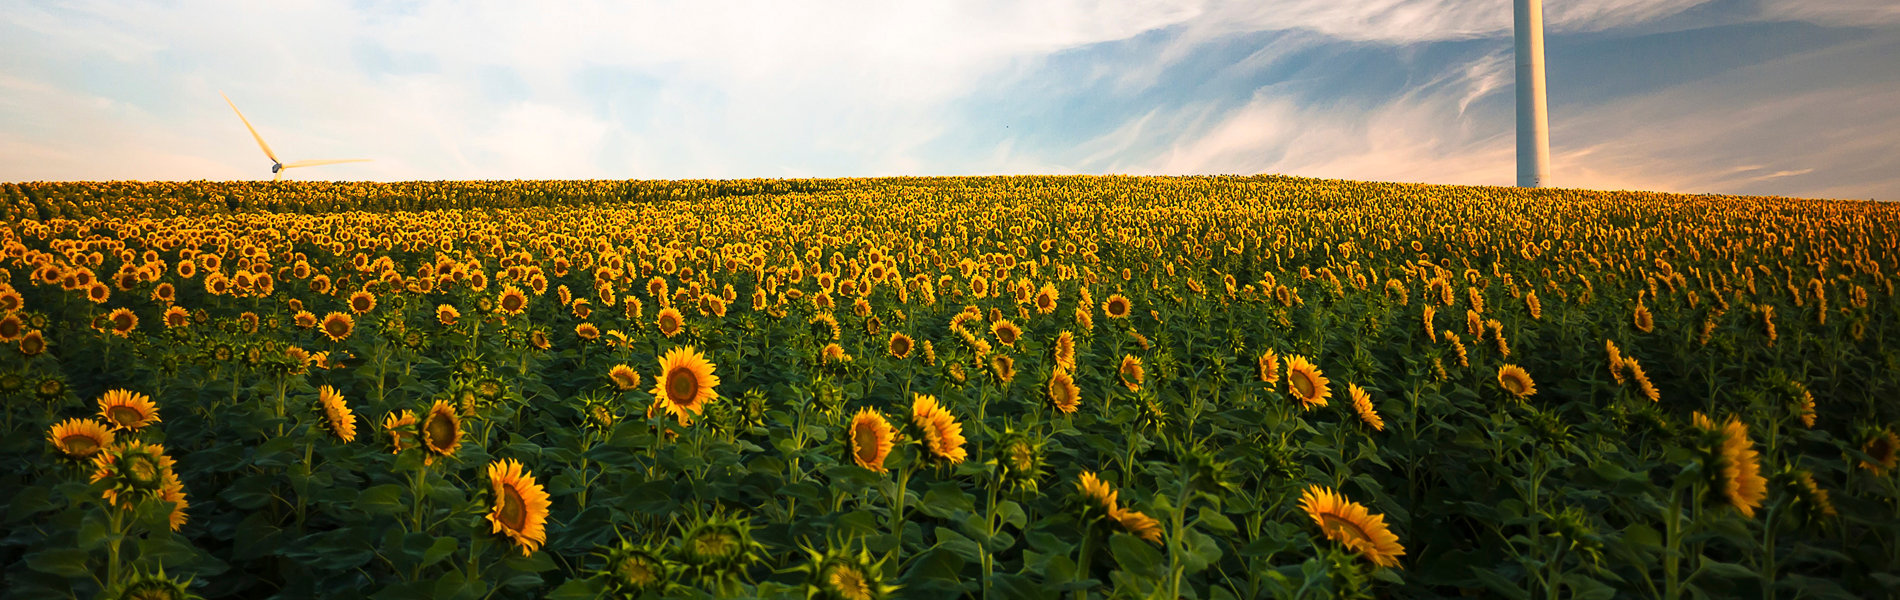 Farm of sunflowers | Coor